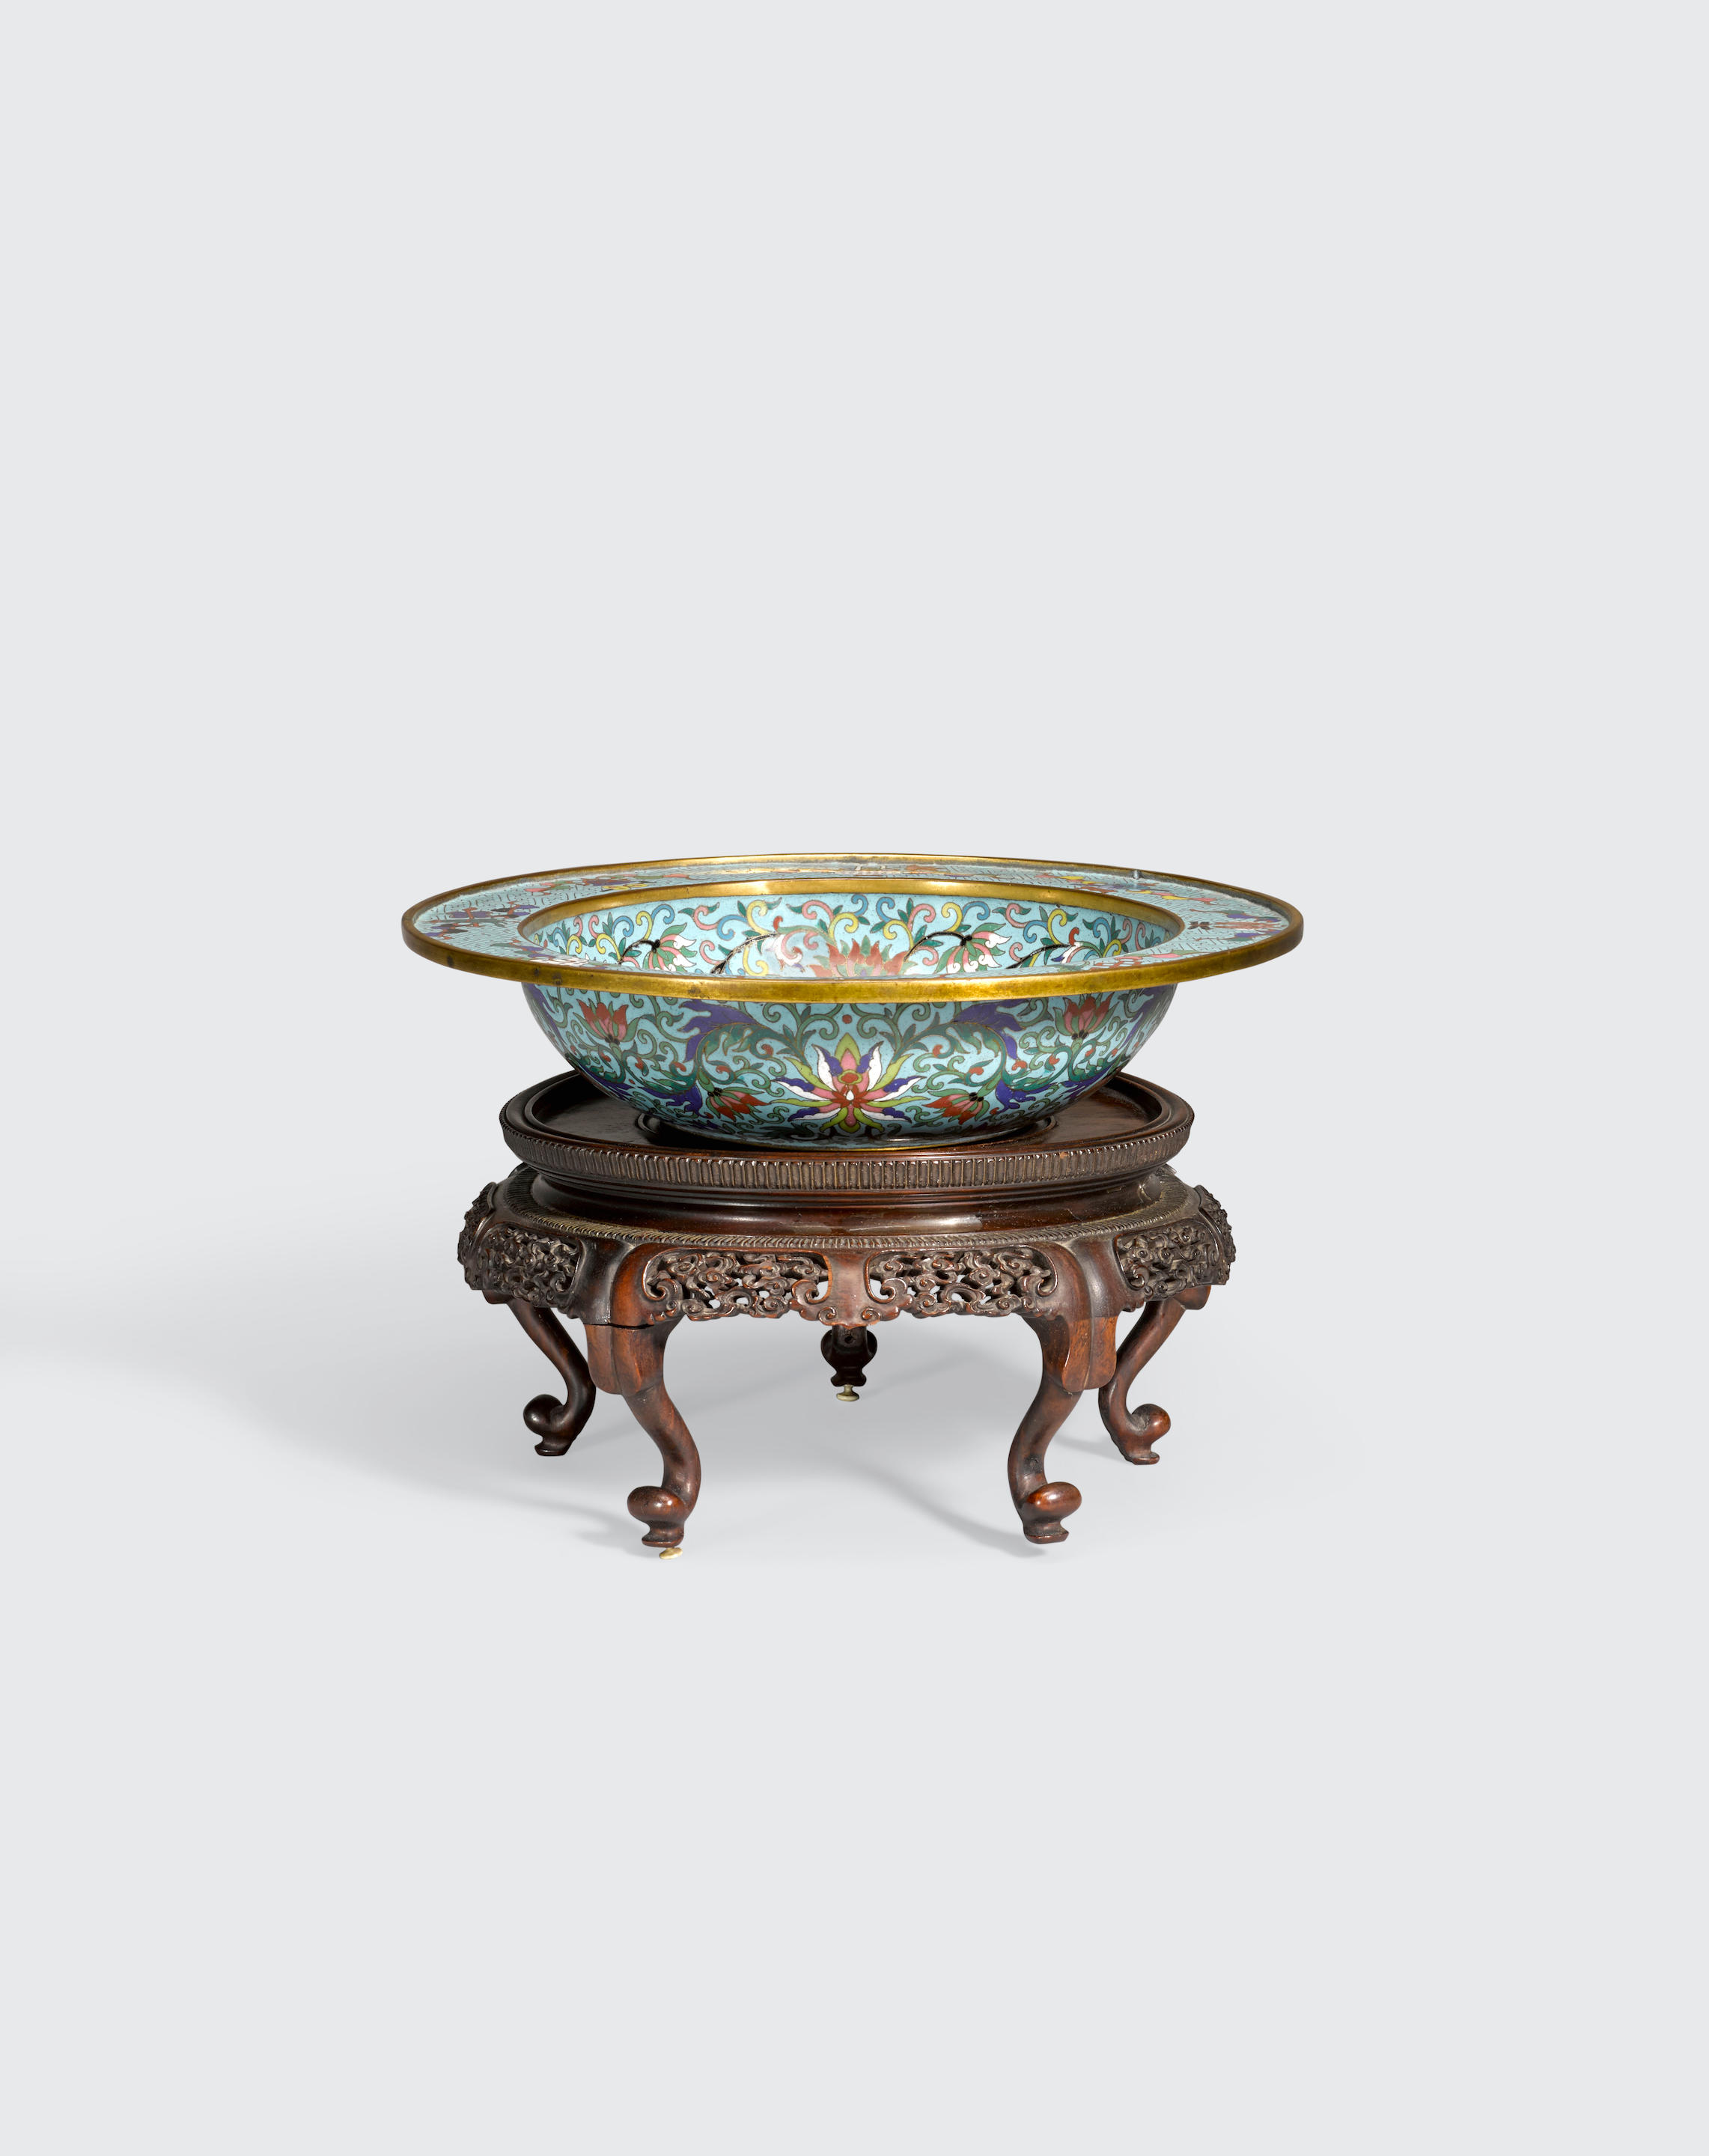 A small cloisonné enameled basin and a pieced wood stand